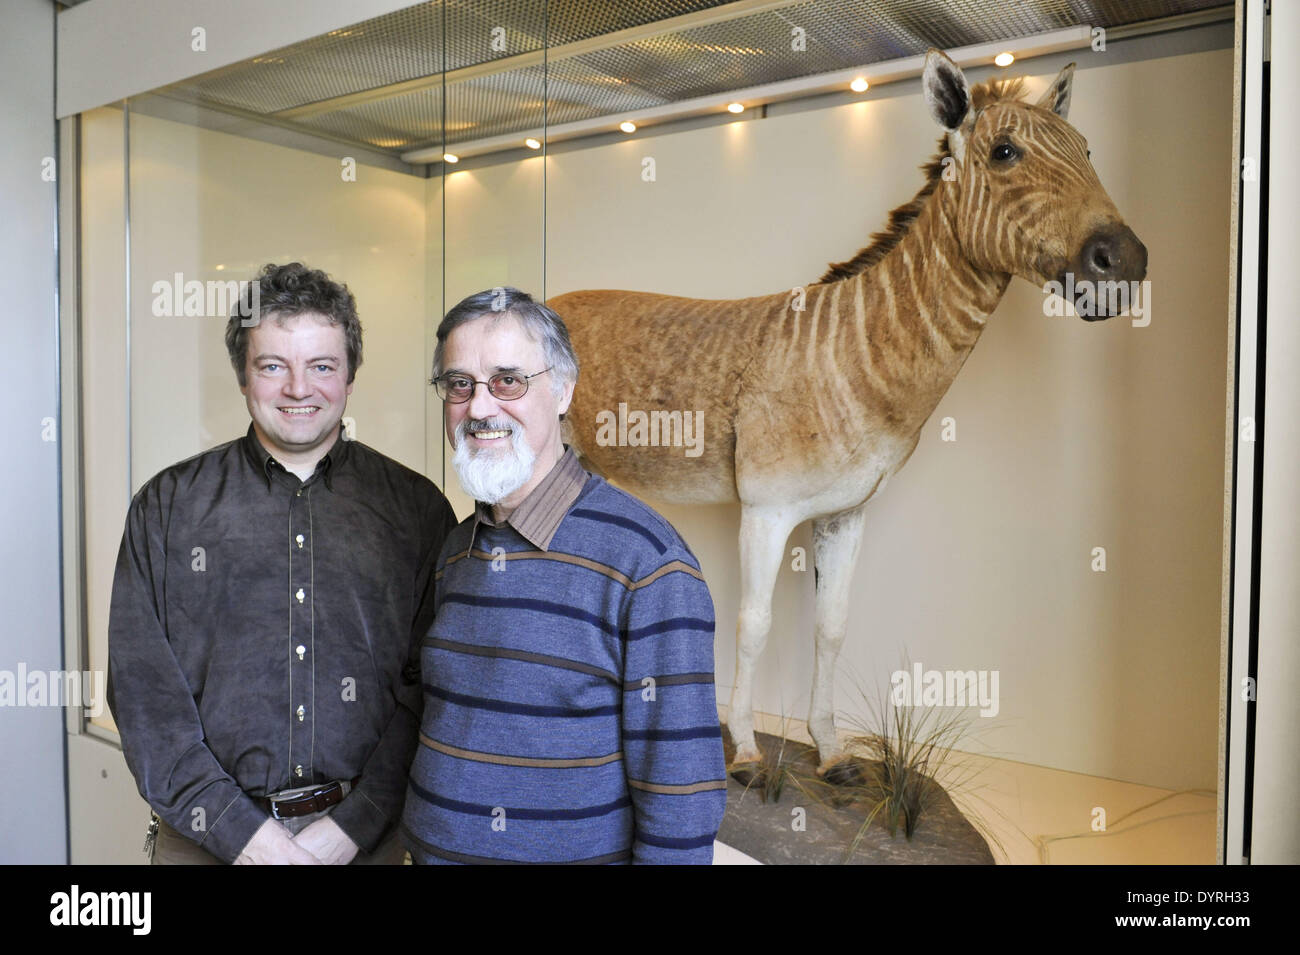 Michael Apel Klaus Schoenitzer in the Museum of Man and Nature Munich, Stock Photo - Alamy